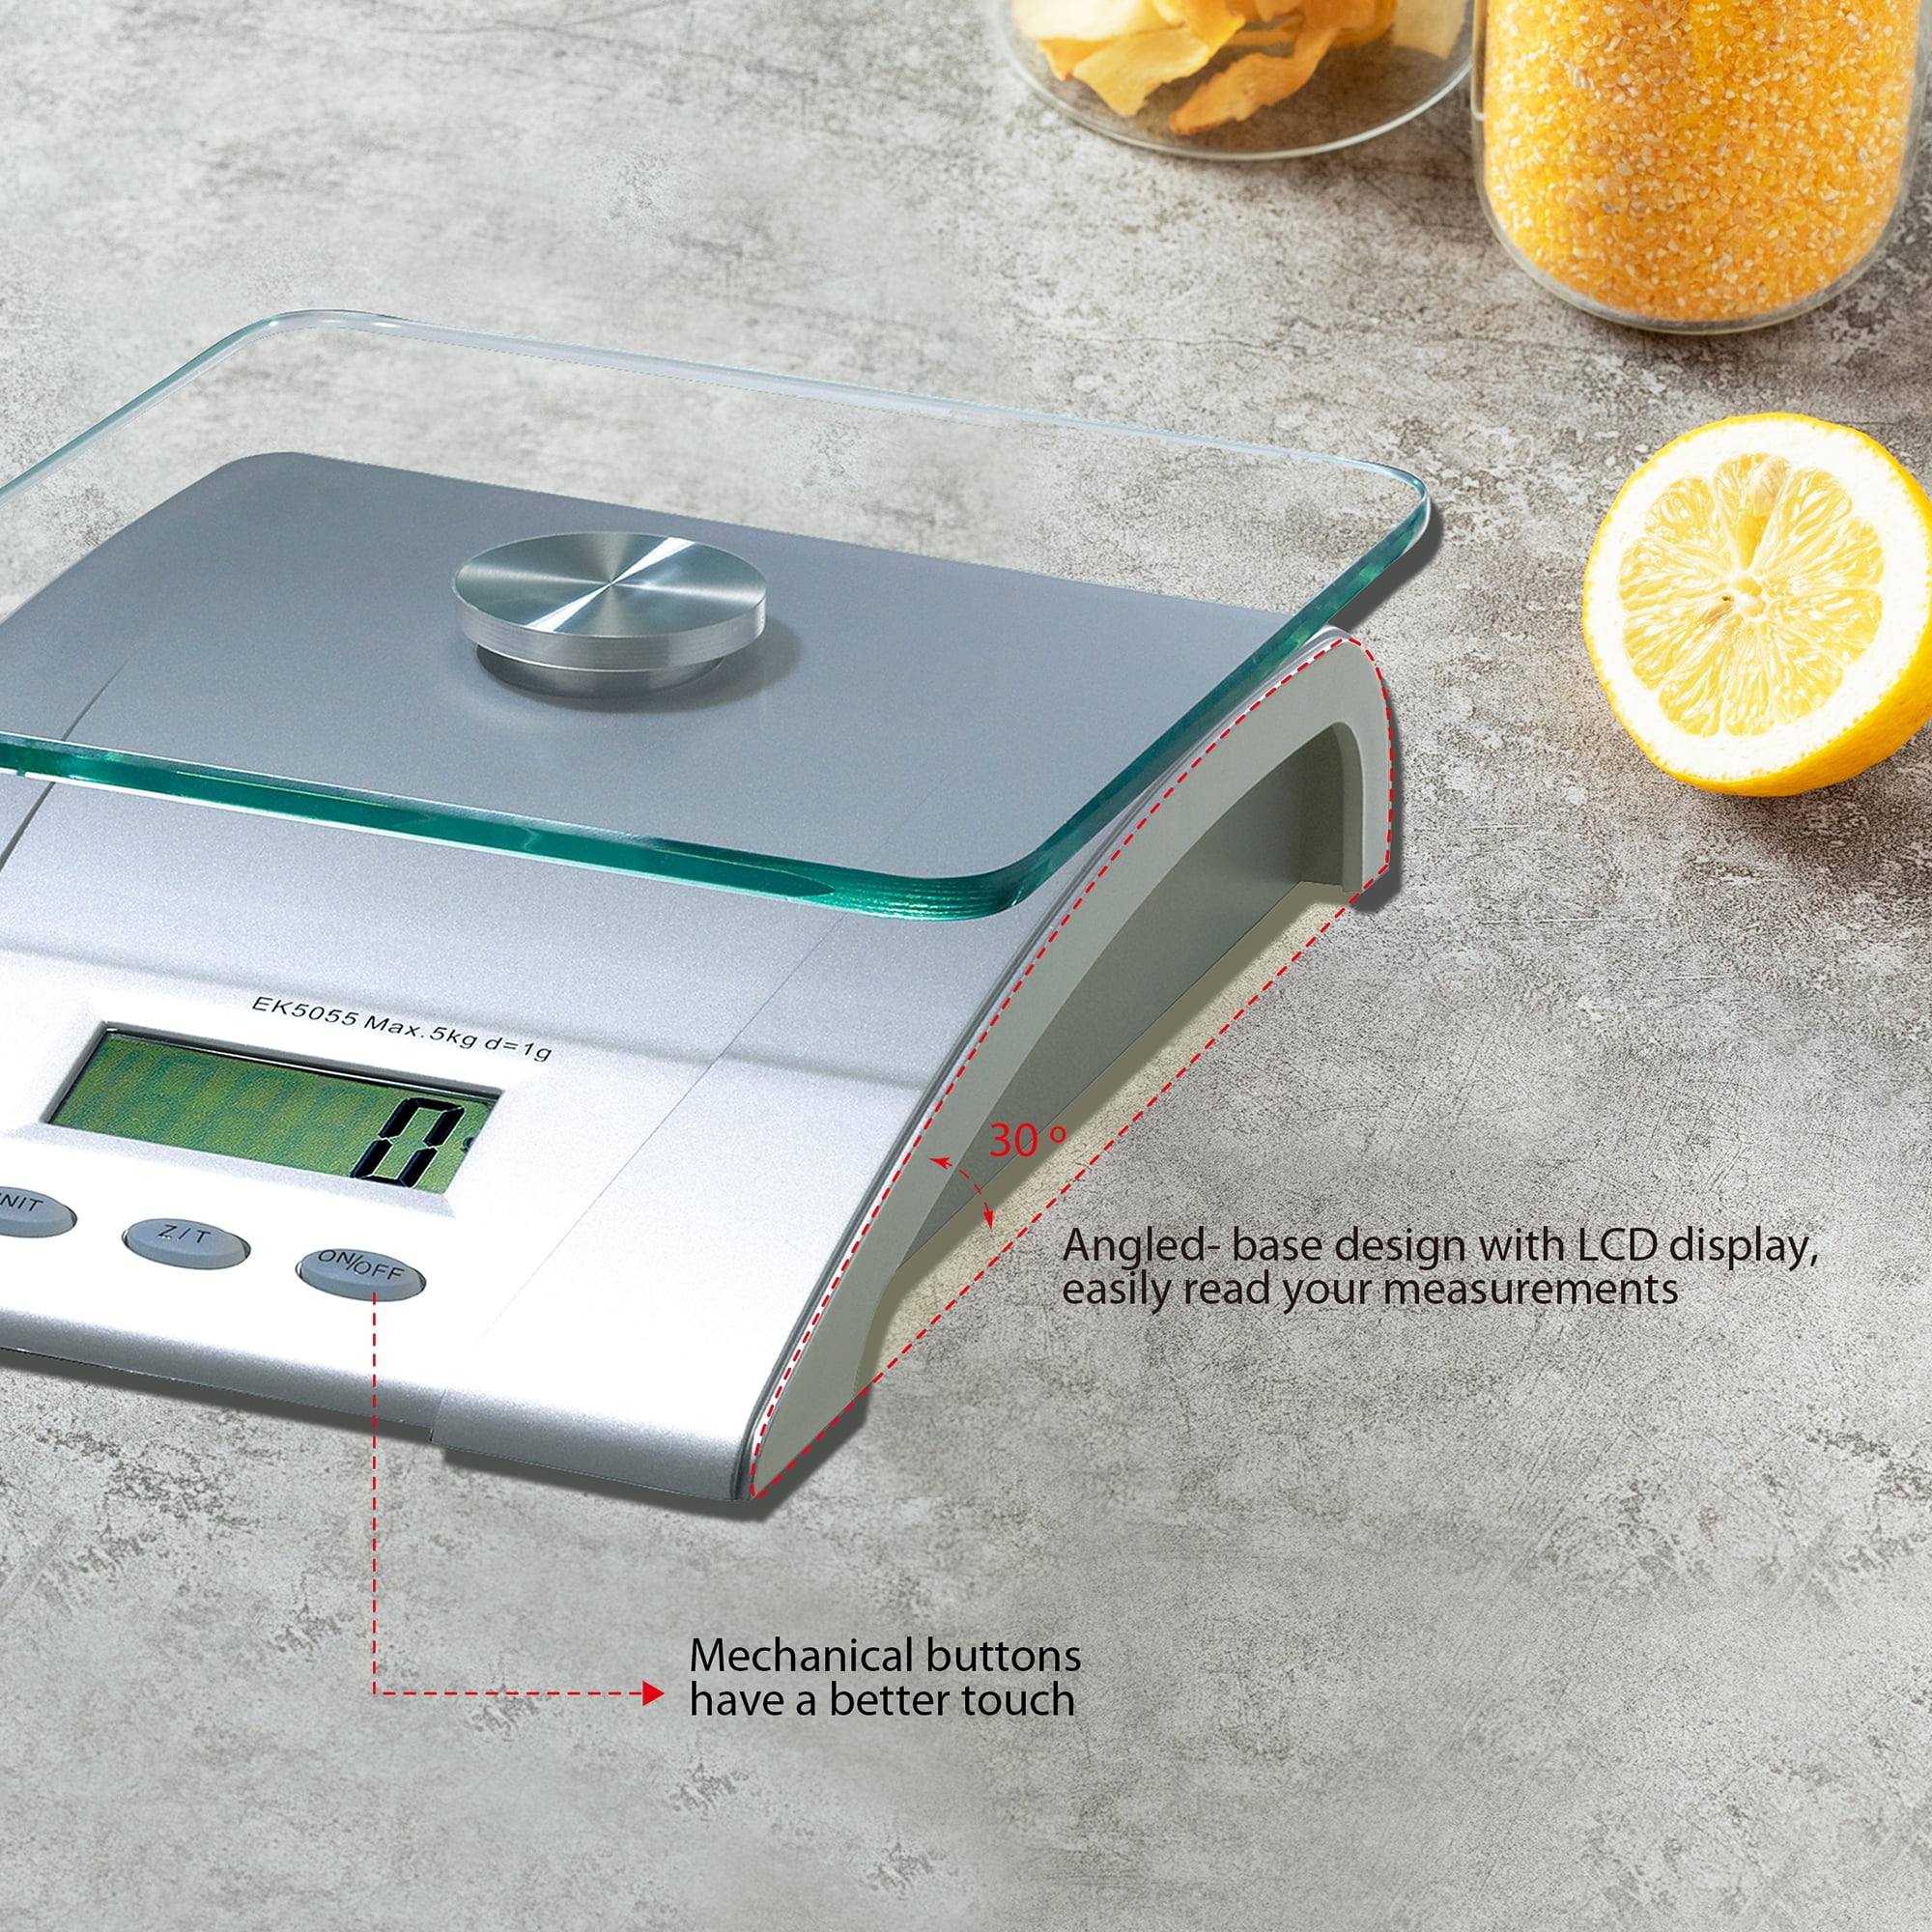 Mainstays Stainless Steel Digital Kitchen Scale, Silver